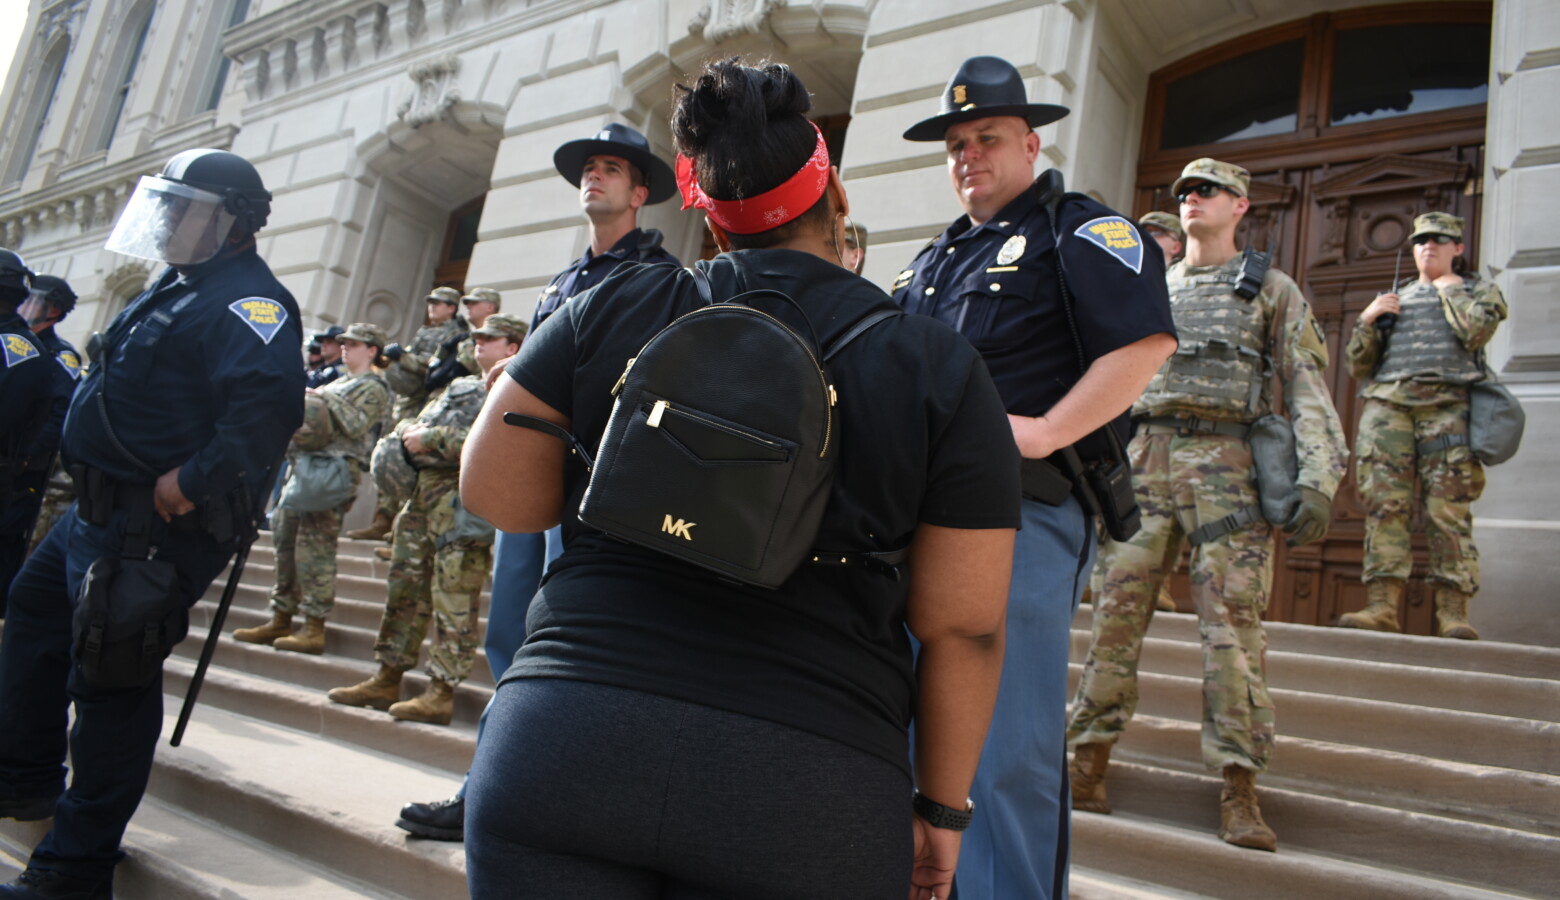 State Police troopers and Indiana National Guardsmen were stationed around the Indiana Statehouse during 2020 Black Lives Matter protests. (Justin Hicks/IPB News)